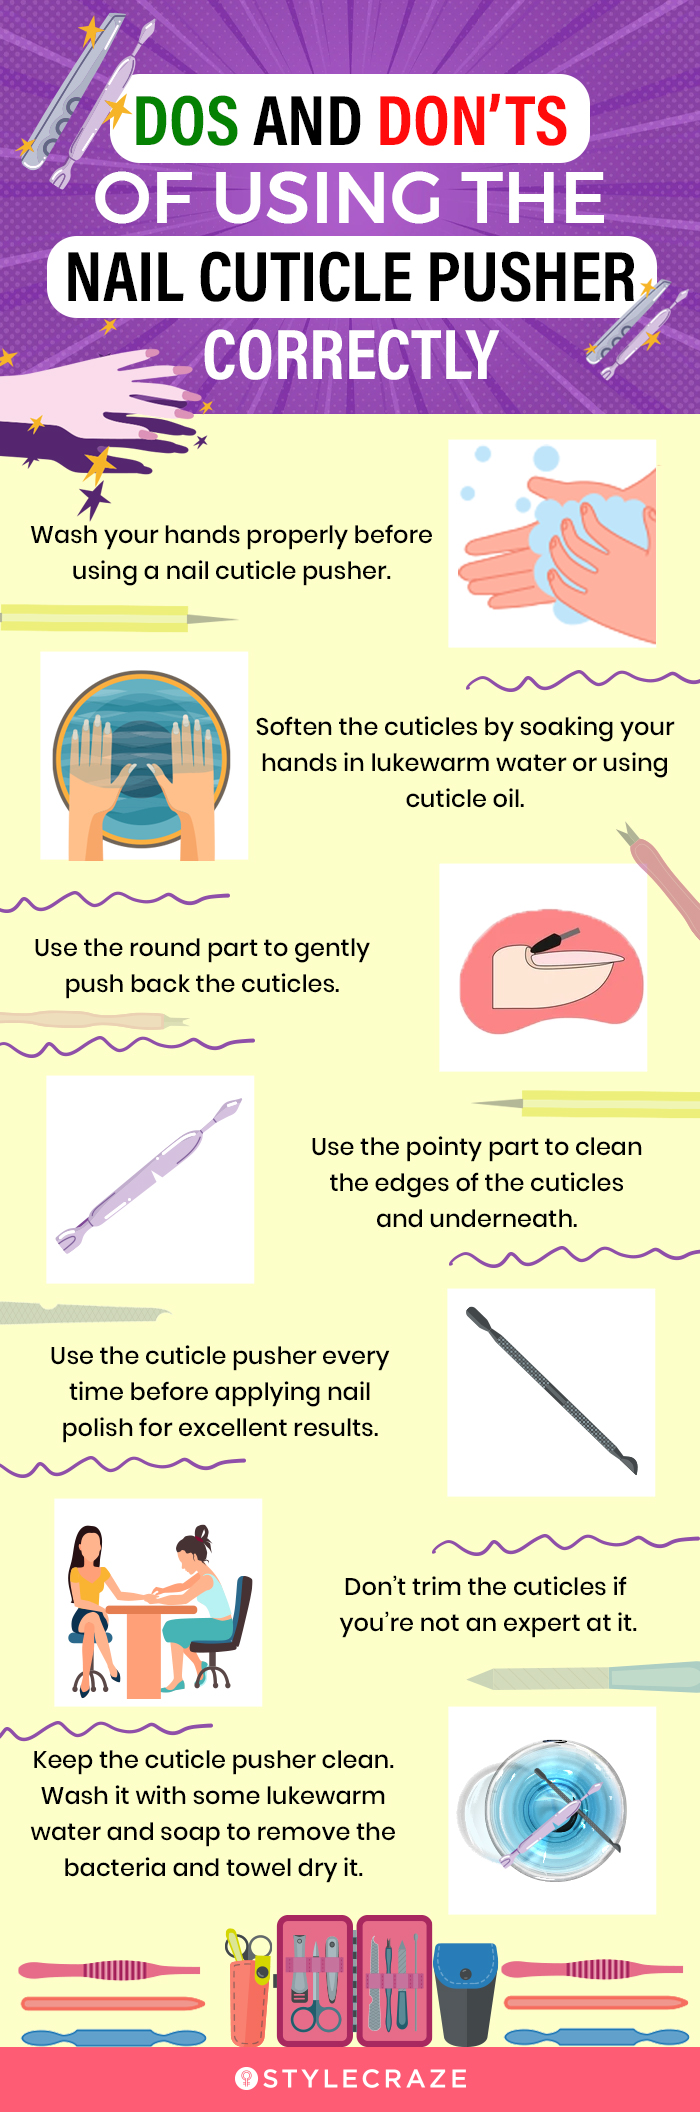 Do’s and Don’ts Of Using The Nail Cuticle Pusher Correctly (infographic)